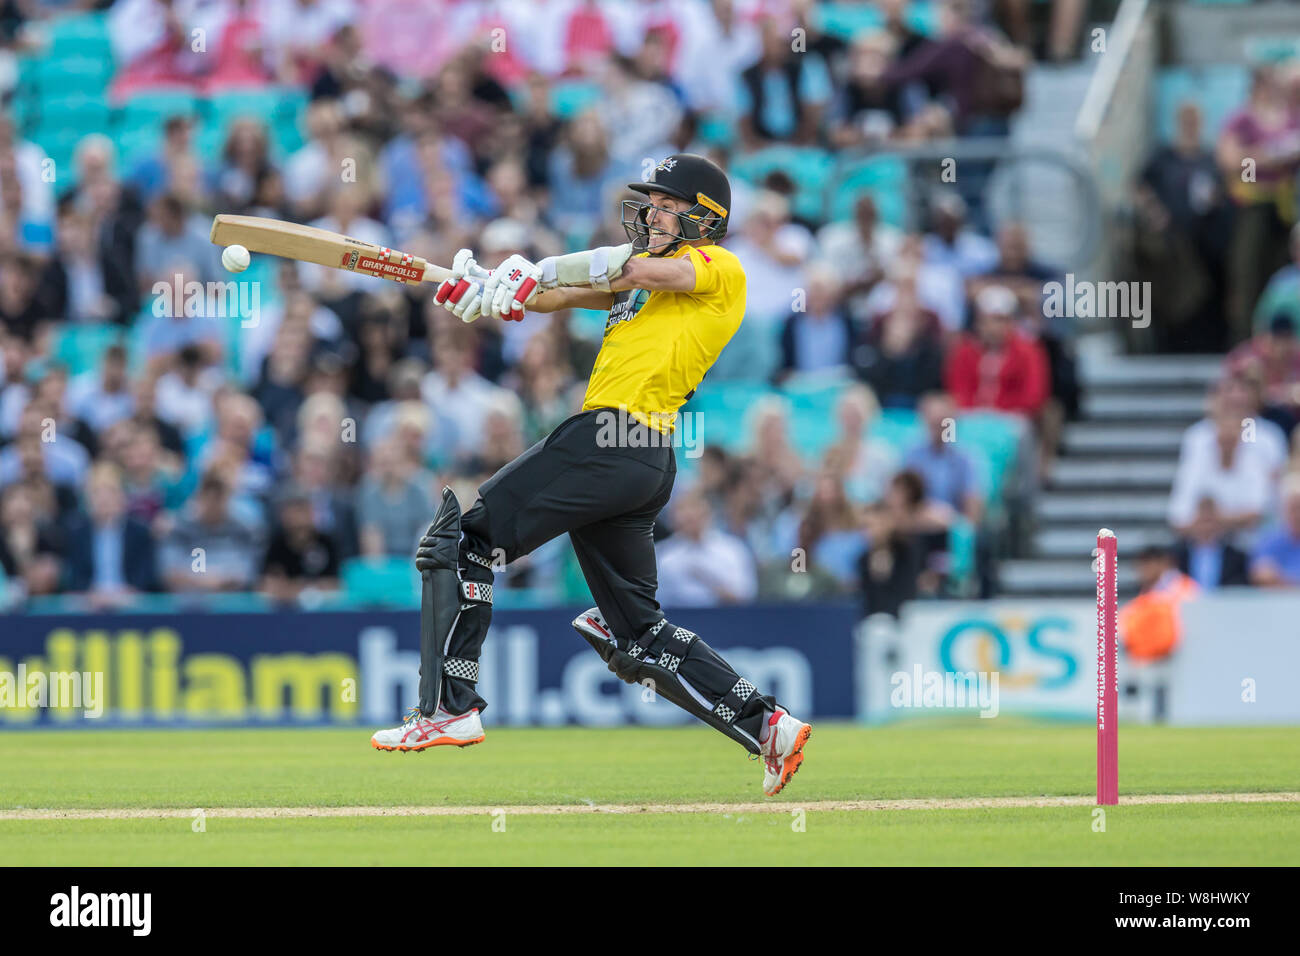 London, UK. 9 August, 2019. Michael Klinger batting for Gloucestershire against Surrey in the Vitality T20 Blast match at the Kia Oval. David Rowe/Alamy Live News Stock Photo